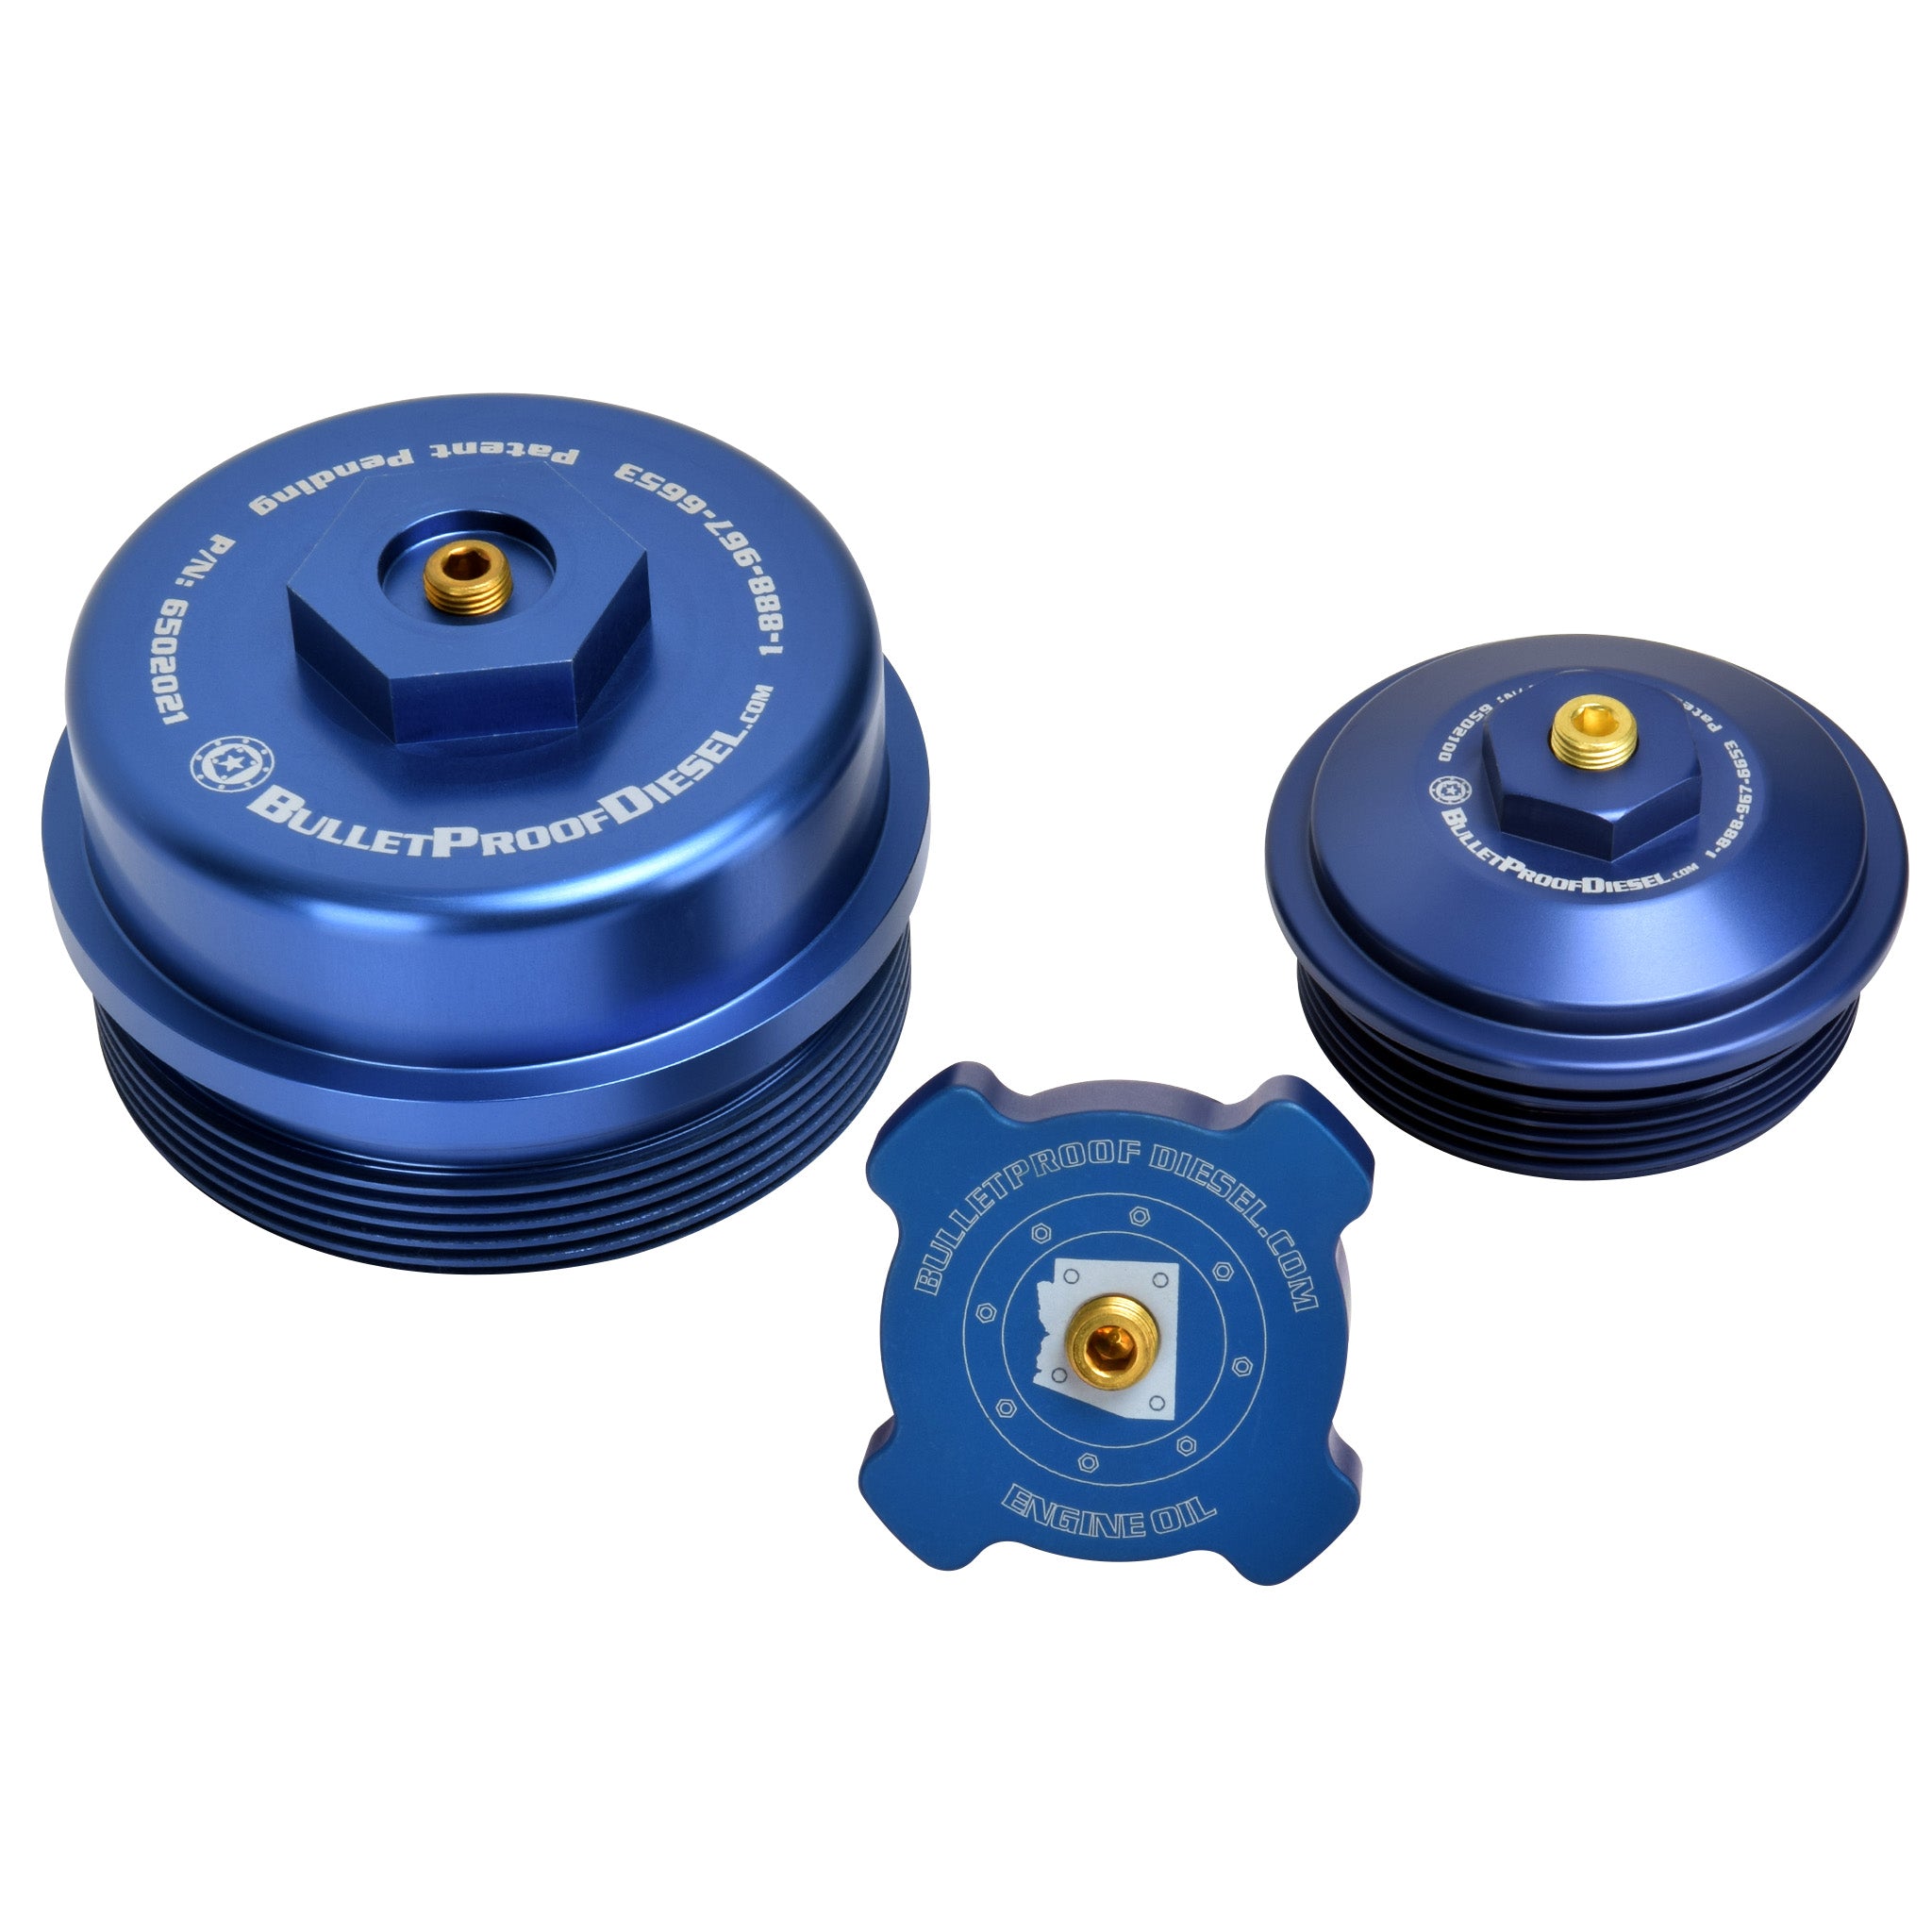 Upgraded Direct Fit Blue Anodized Billet Aluminum Oil Filter, Oil Fill, and Lower Fuel Rail Cap Set for the Ford Power Stroke 6.0L Diesel with 1/8” MPT Threaded Port. Fits Years 2003 2004 2005 2006 2007.